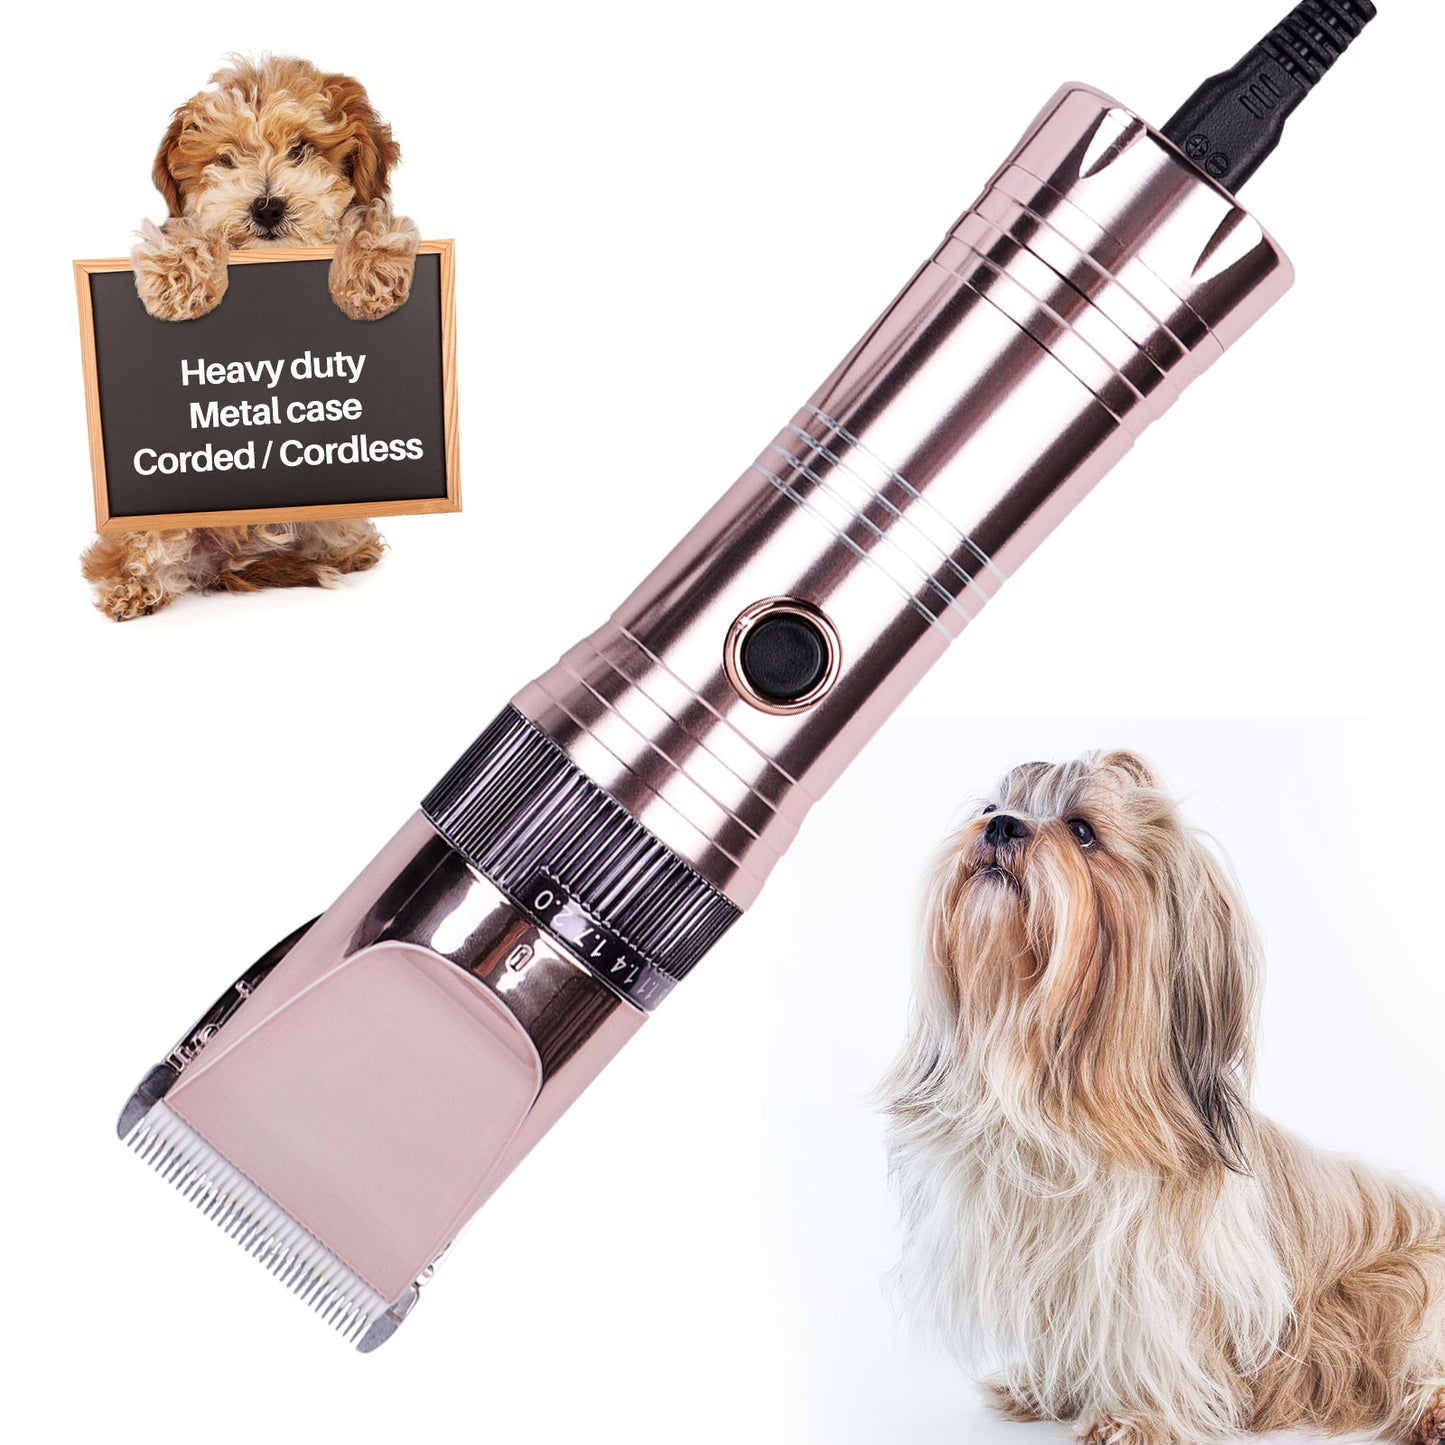 BNISE Dog Grooming Clippers Professional Dog Grooming Tools Rechargeable Cordless Quiet Electric Dog Grooming Kit For Dogs Cats Pets